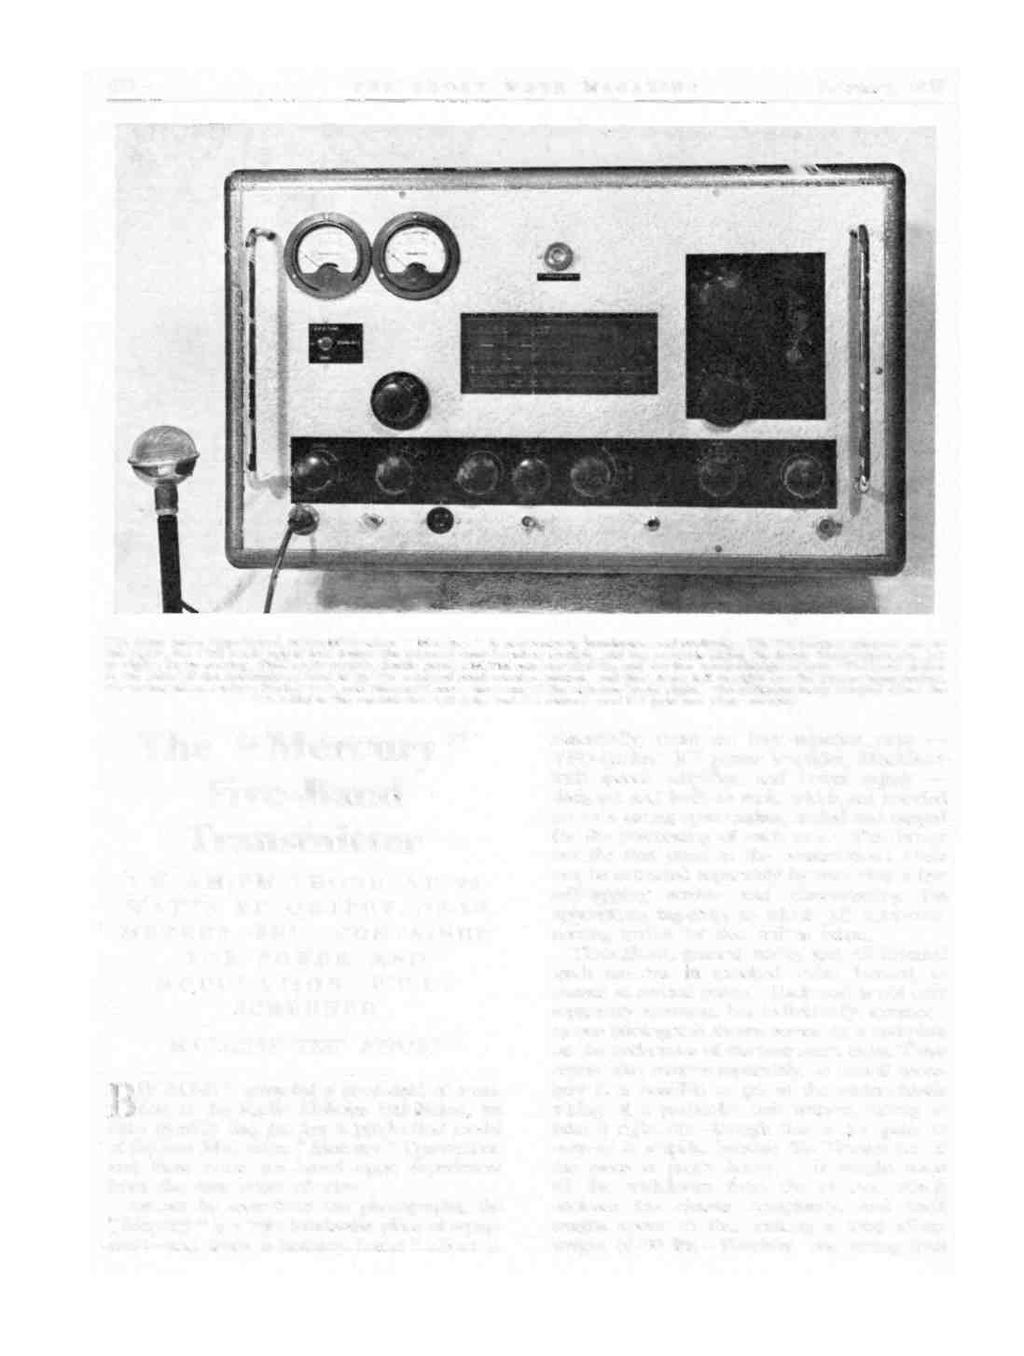 652 THE SHORT WAVE MAGAZINE February, 1958 The front panel appearance of the Minimitter " Mercury " is particularly handsome and striking.